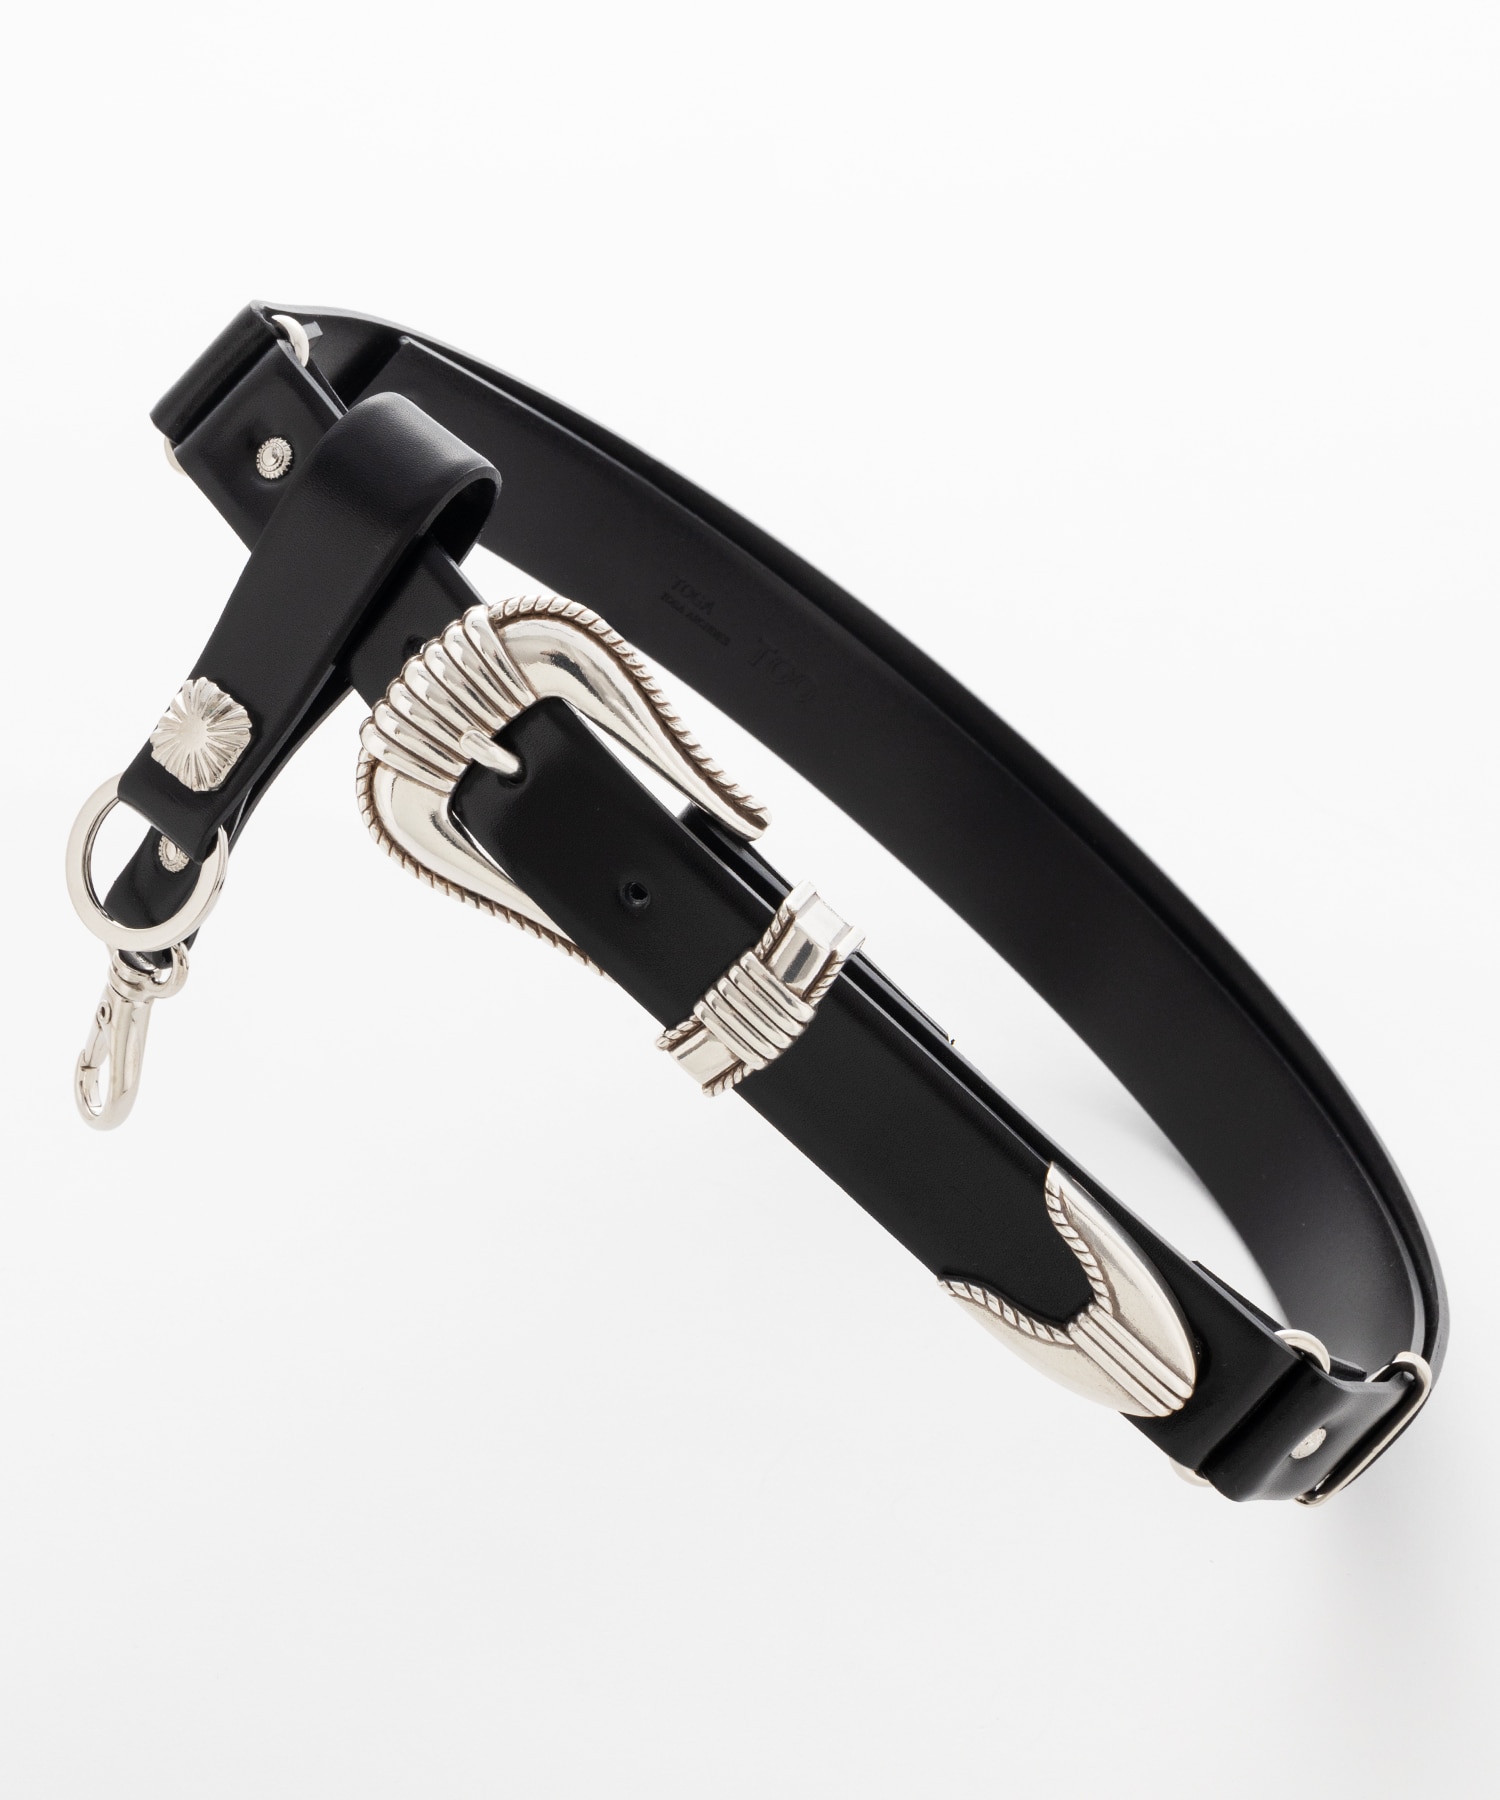 Metal buckle belt with key rinng